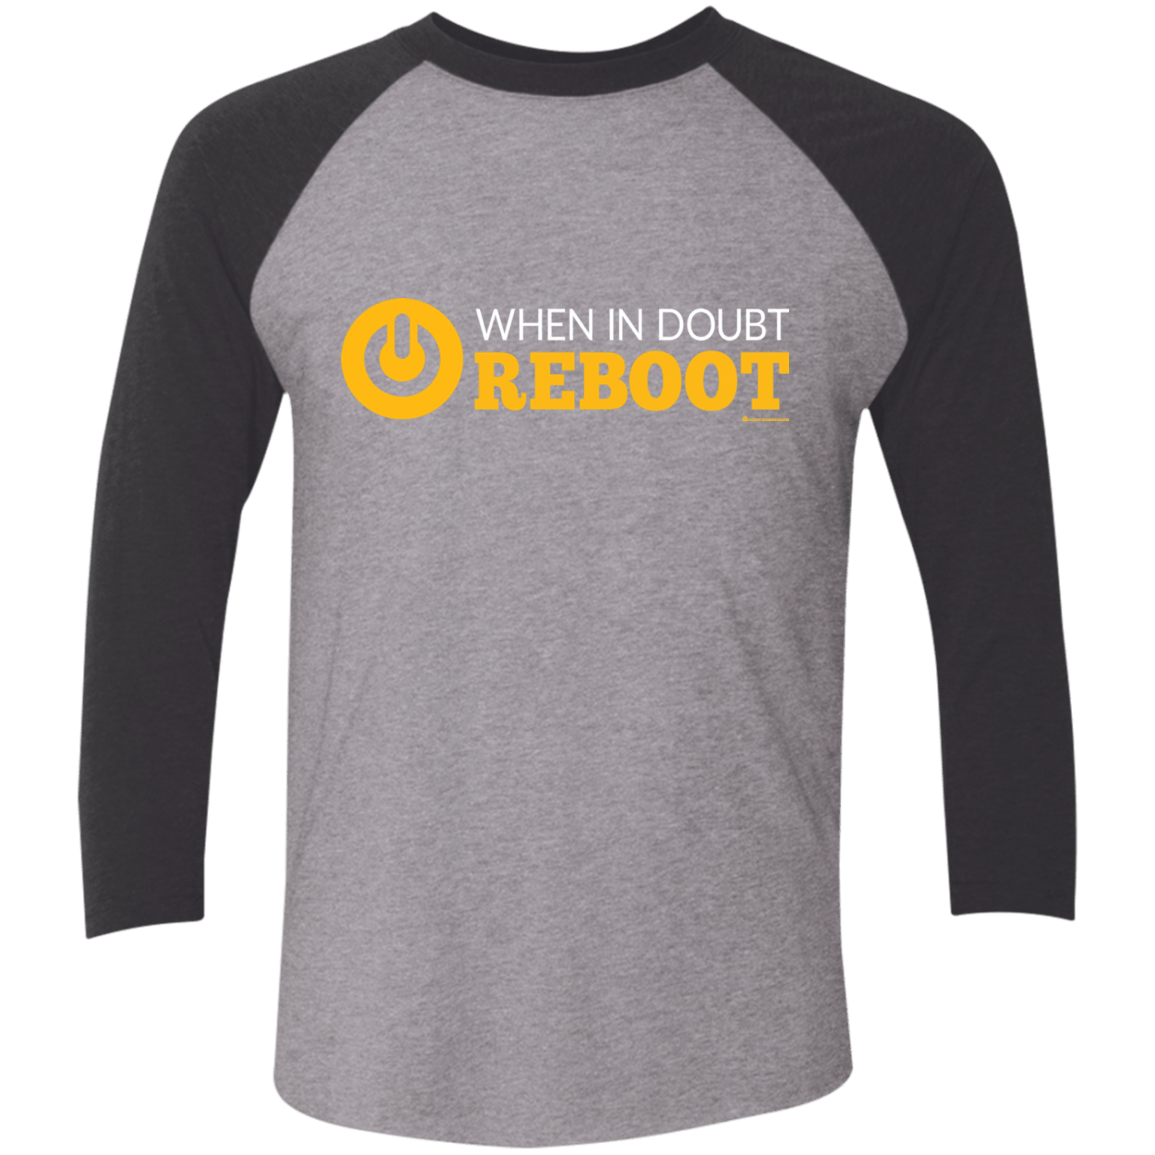 T-Shirts Premium Heather/Vintage Black / X-Small When In Doubt Reboot Men's Triblend 3/4 Sleeve